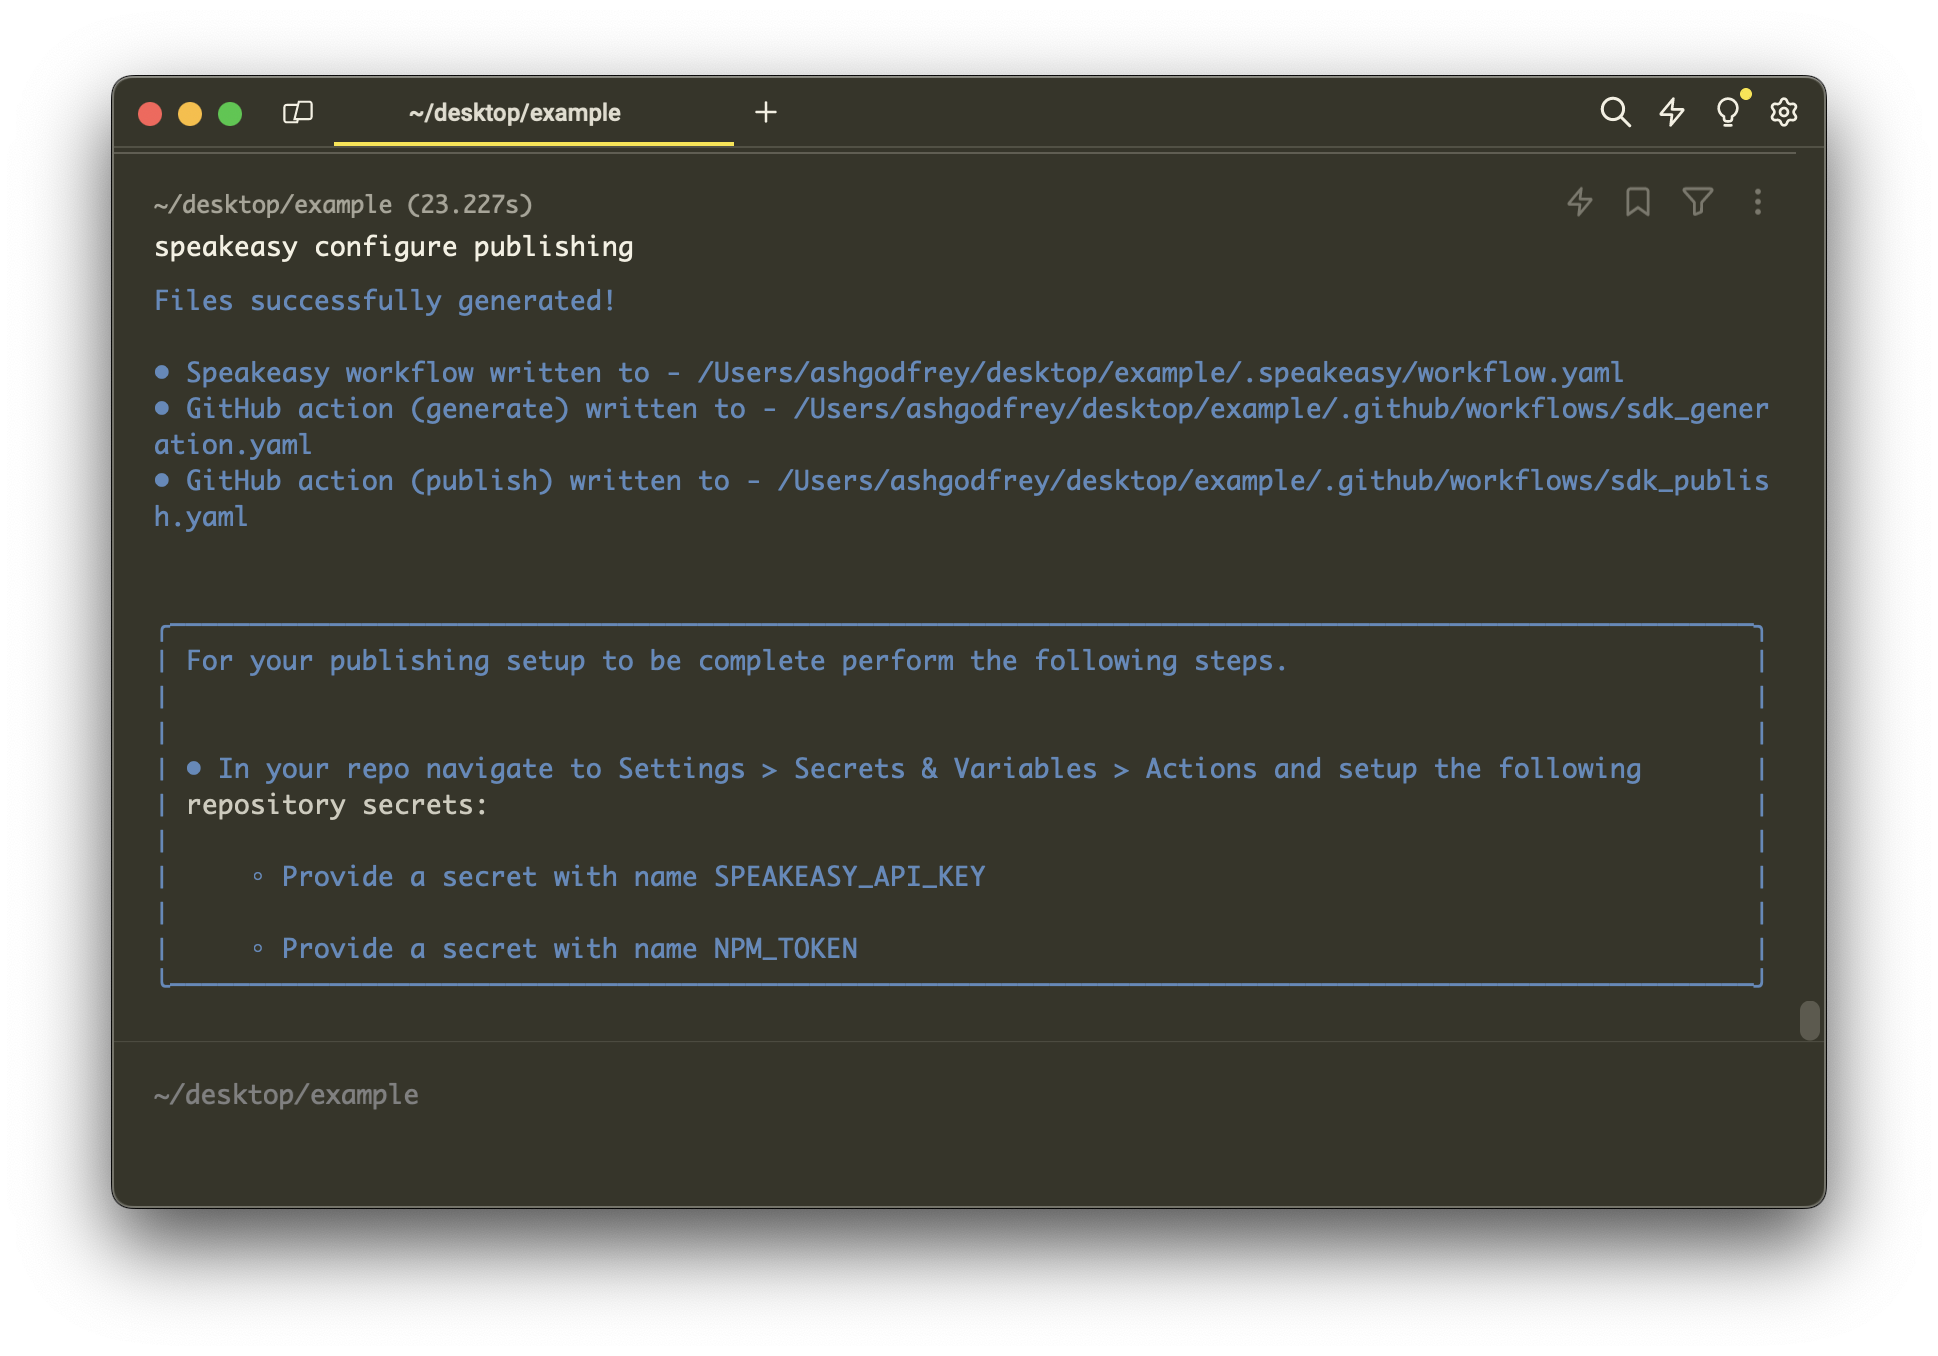 Screenshot of the terminal after succesfully running Speakeasy configure publishing.